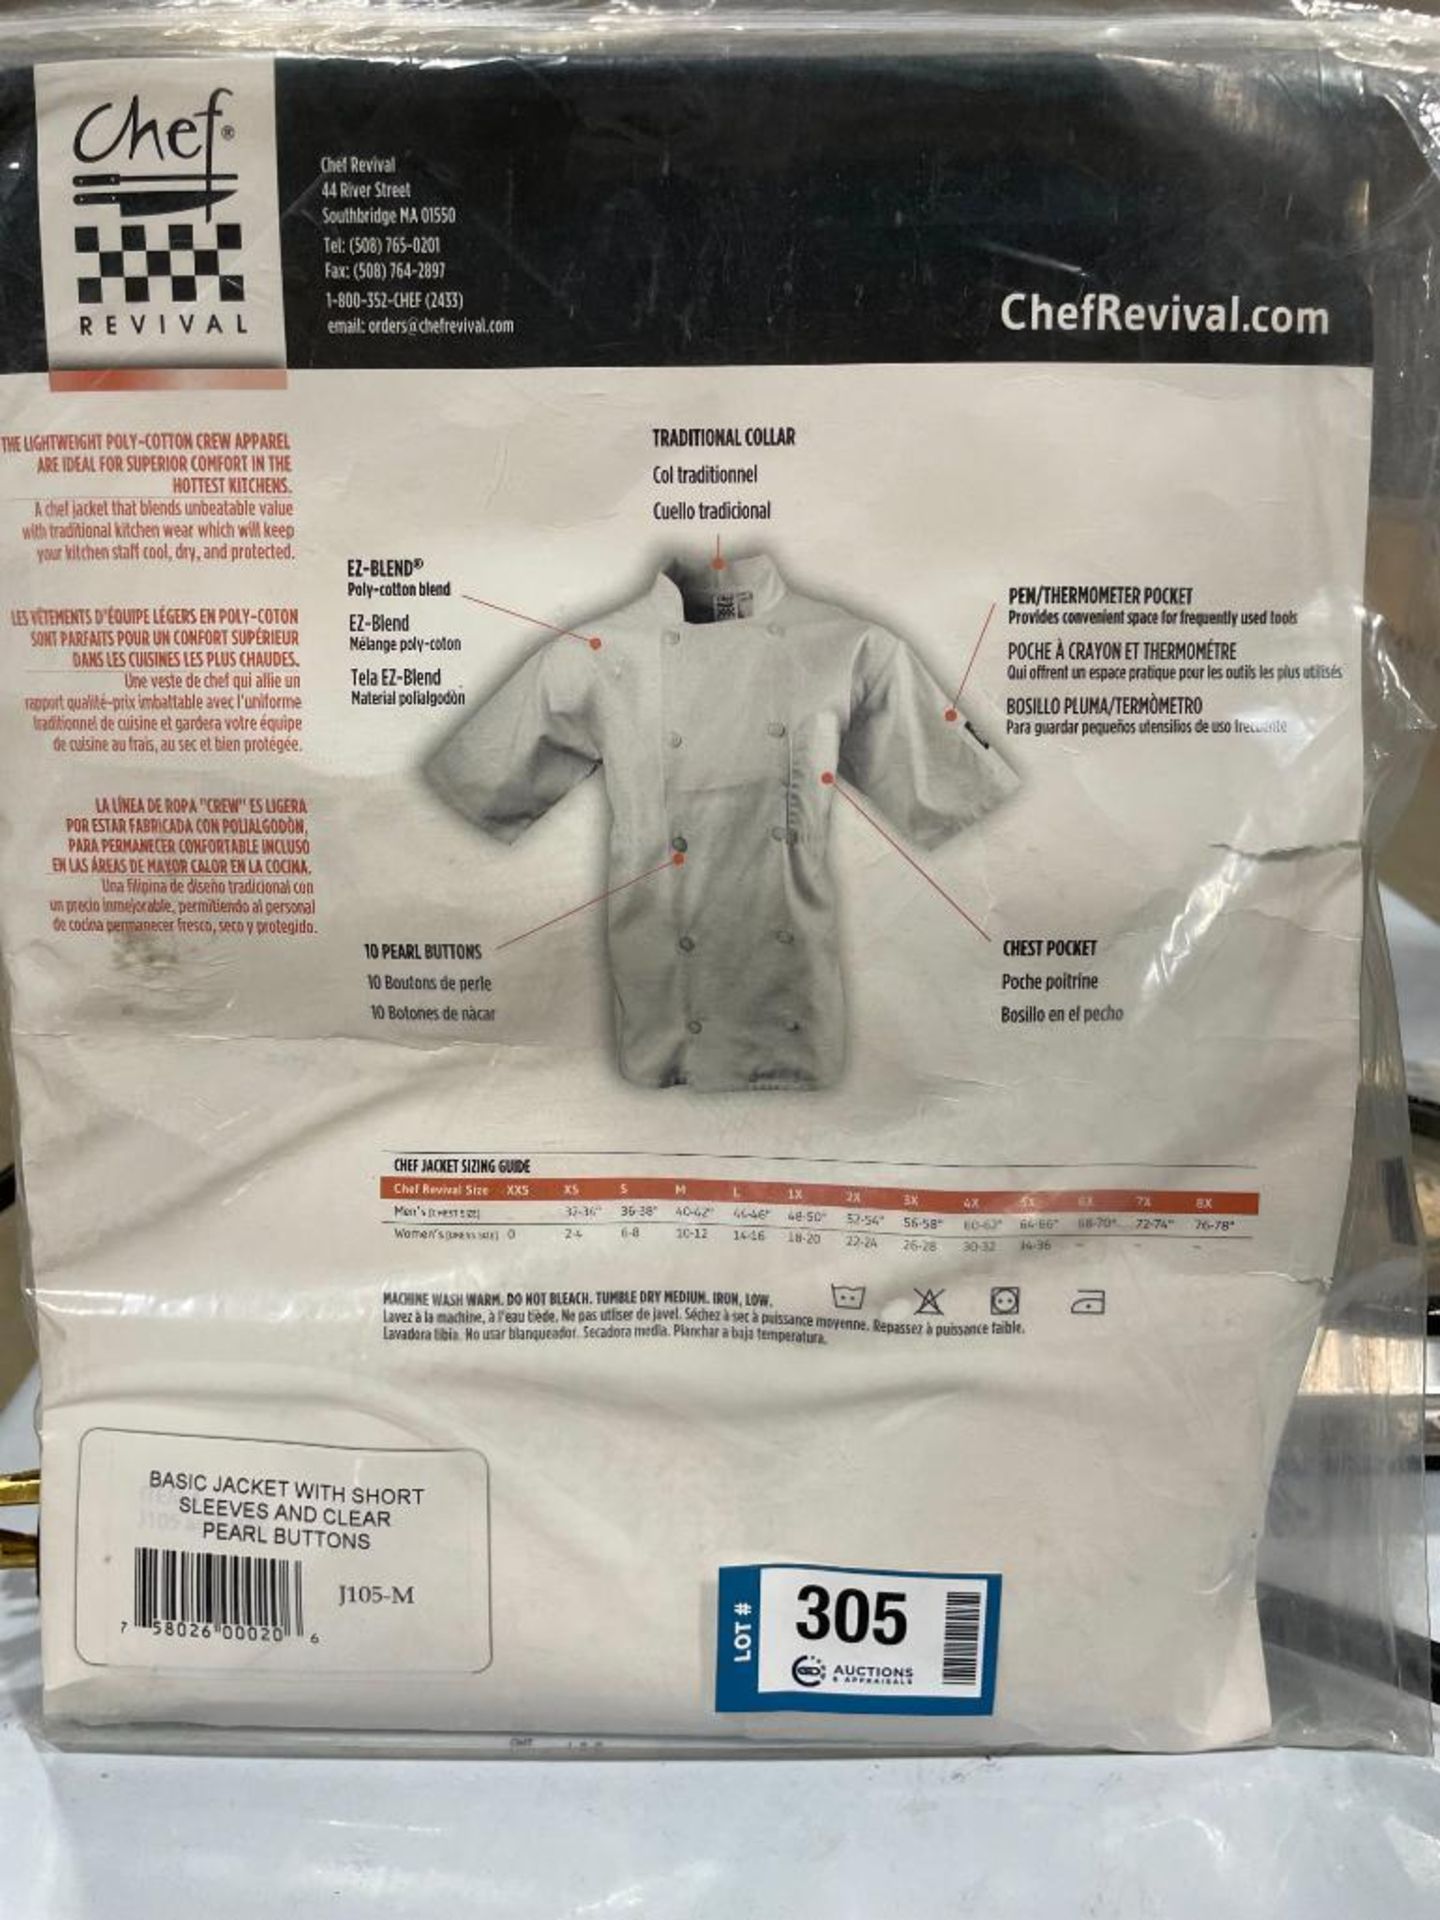 CHEF REVIVAL J105-M BASIC WHITE SHORT SLEEVE DOUBLE-BREASTED CHEF COAT – MEDIUM & CPO2 XL CHEF PANTS - Image 3 of 6